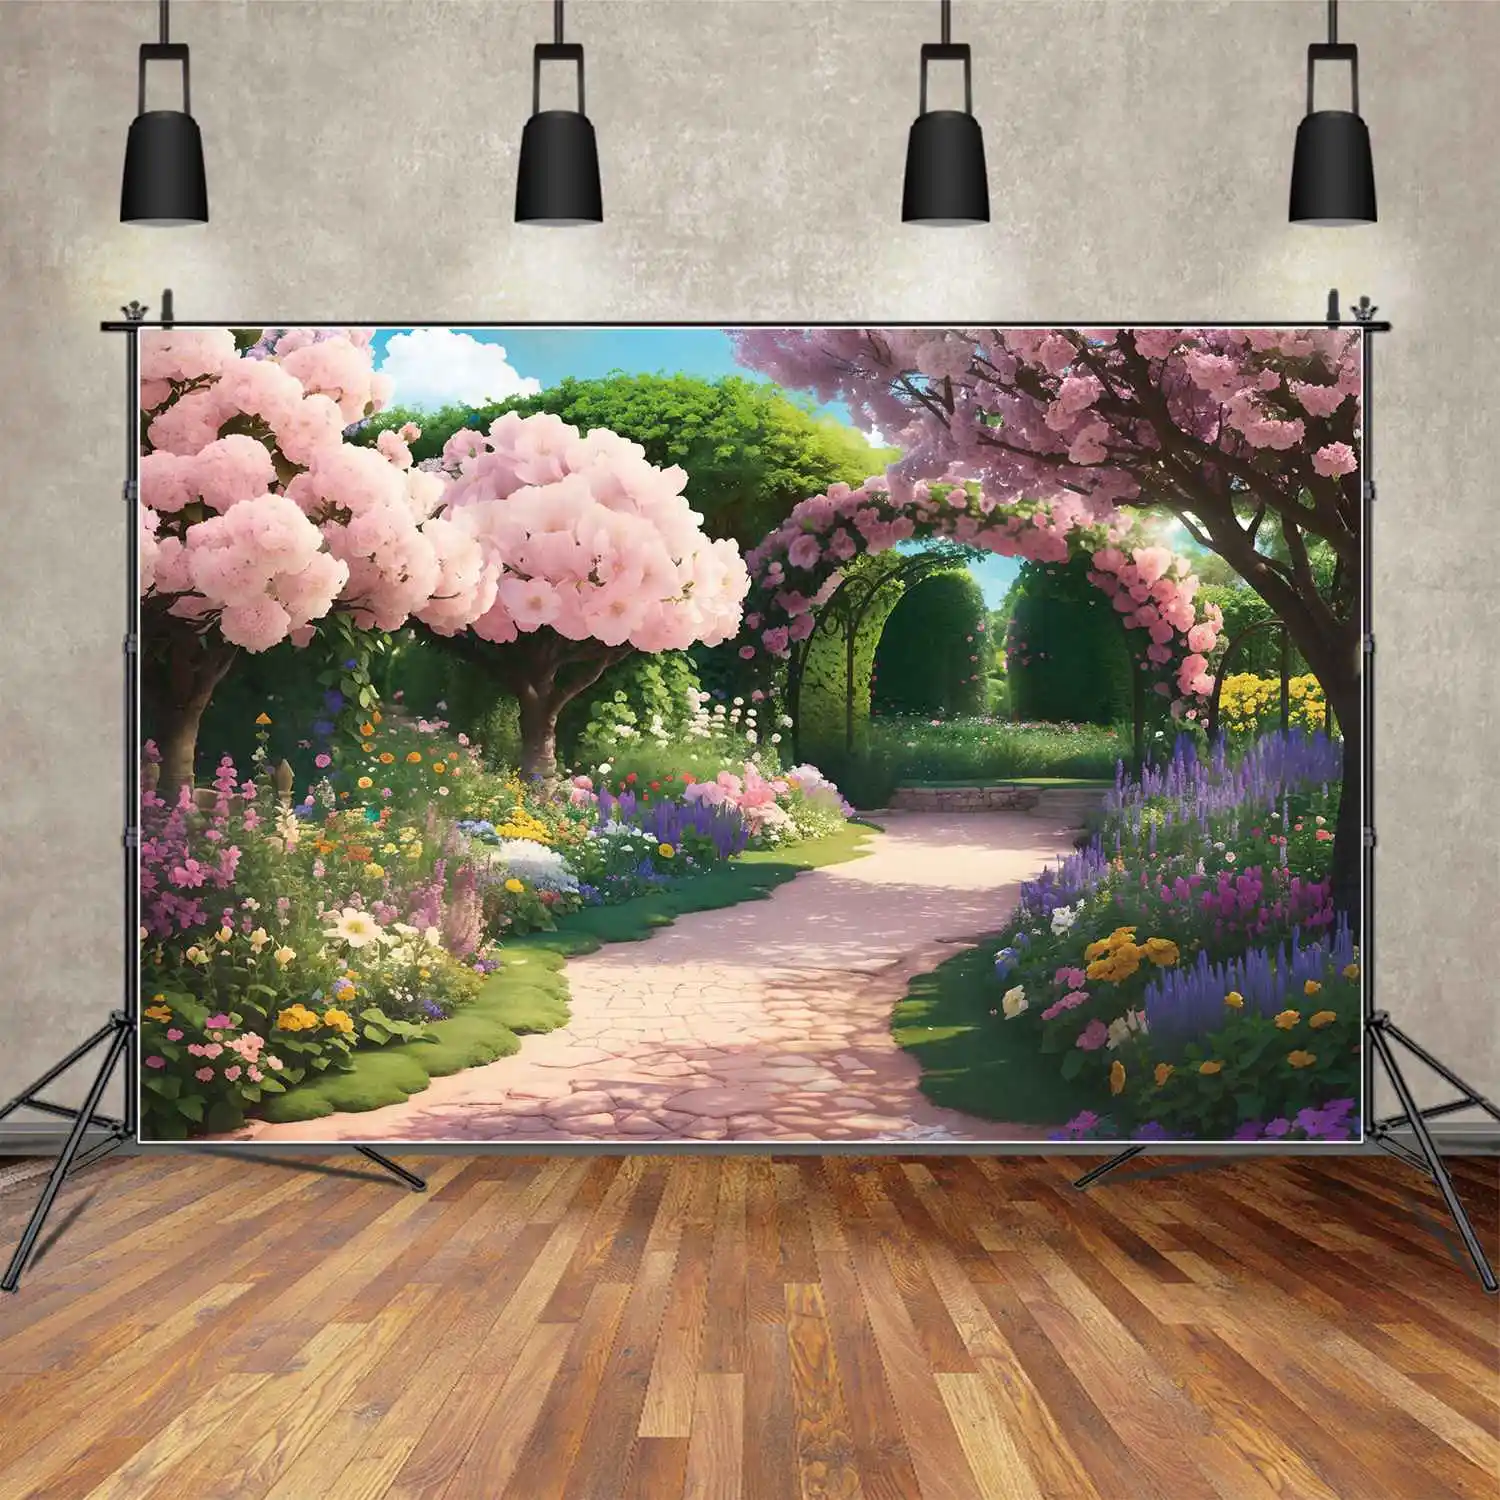 

Flowers Arch Door Party Photography Backdrops Decor Spring Pink Blossom Custom Kids Photo Booth Photographic Backgrounds Banners